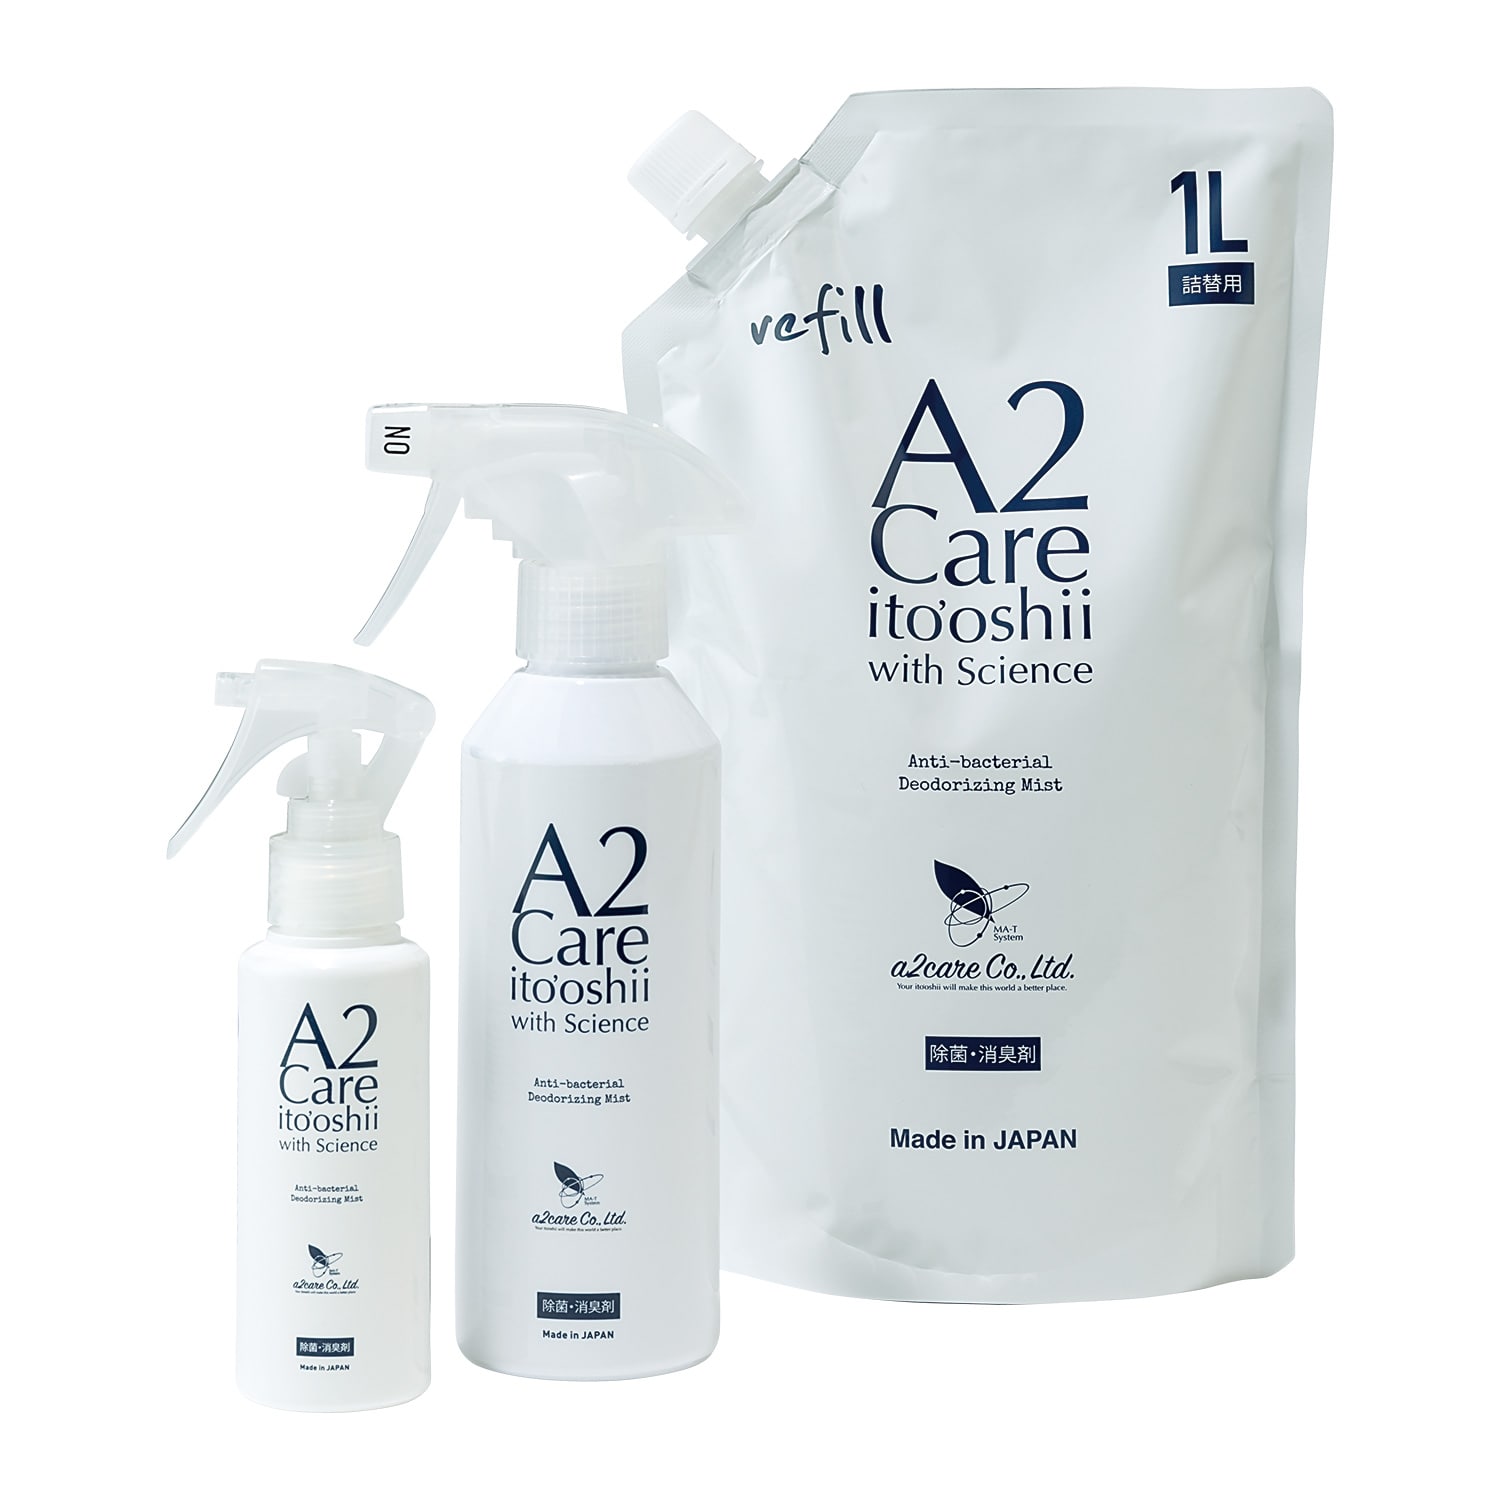 A2Care ギフトセット